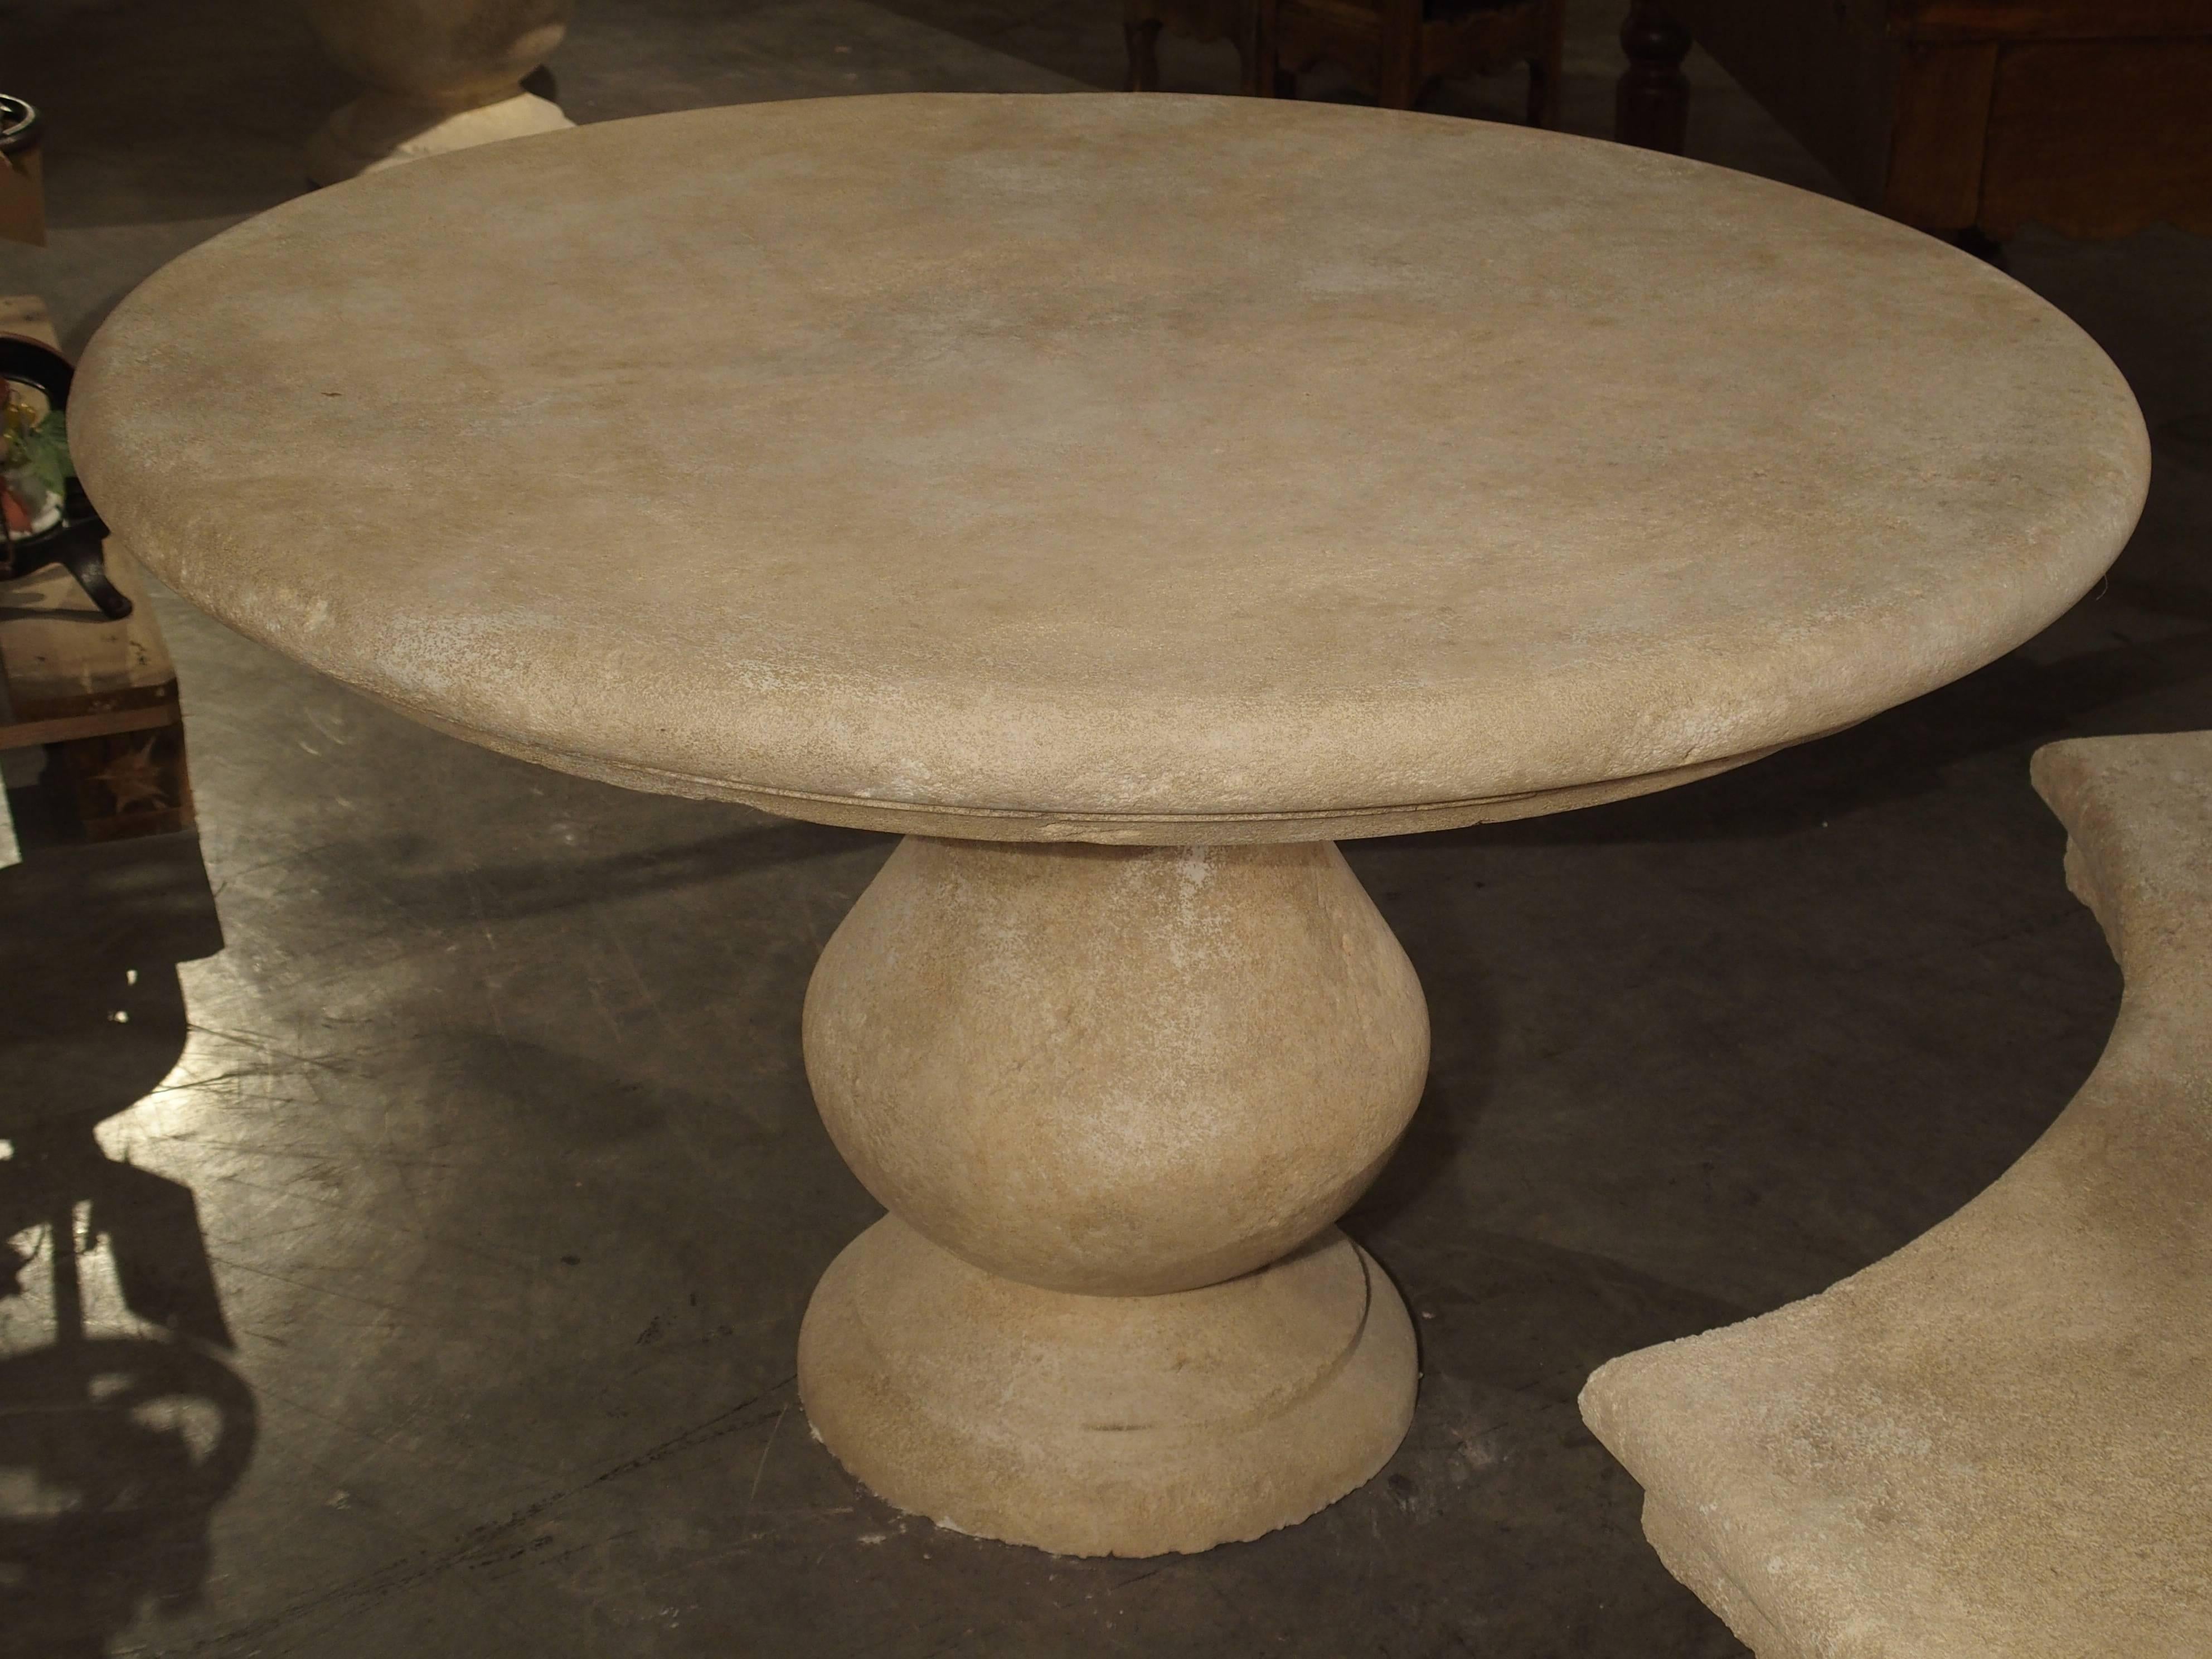 French Provincial Carved Round Limestone Table from Provence, France